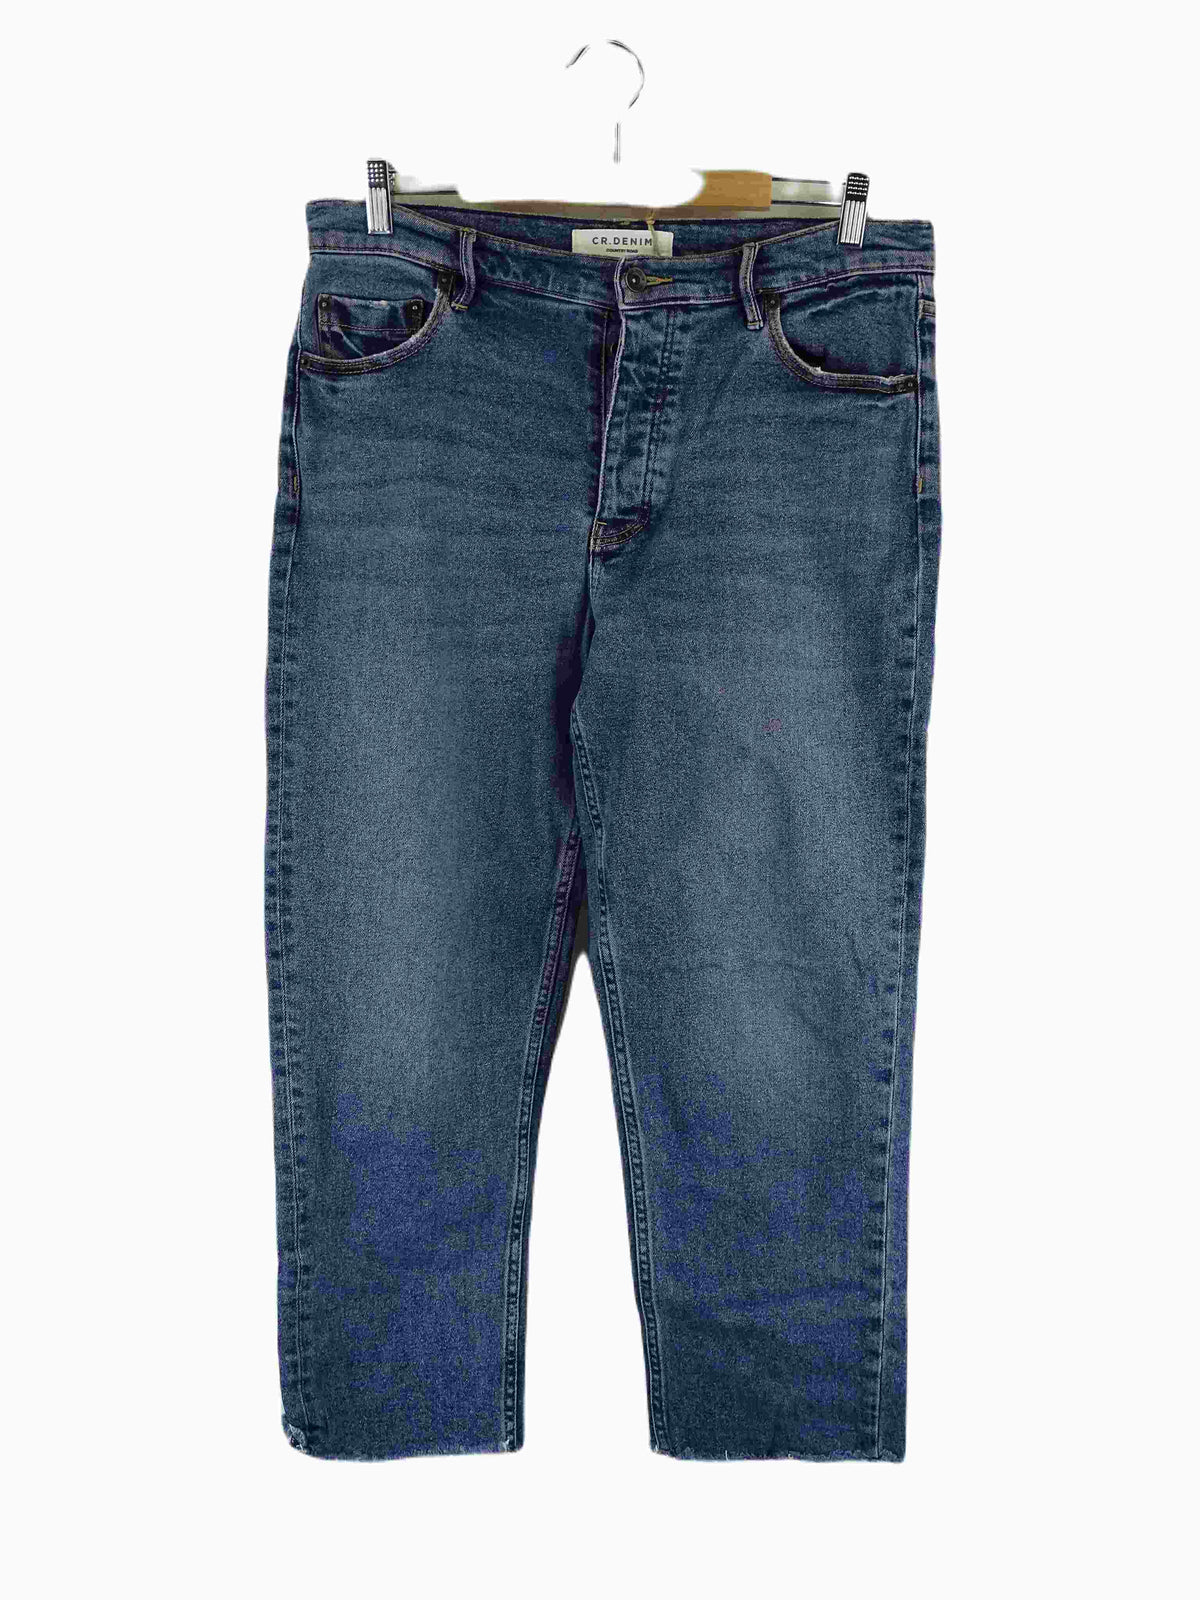 Country Road Denim Jeans 12